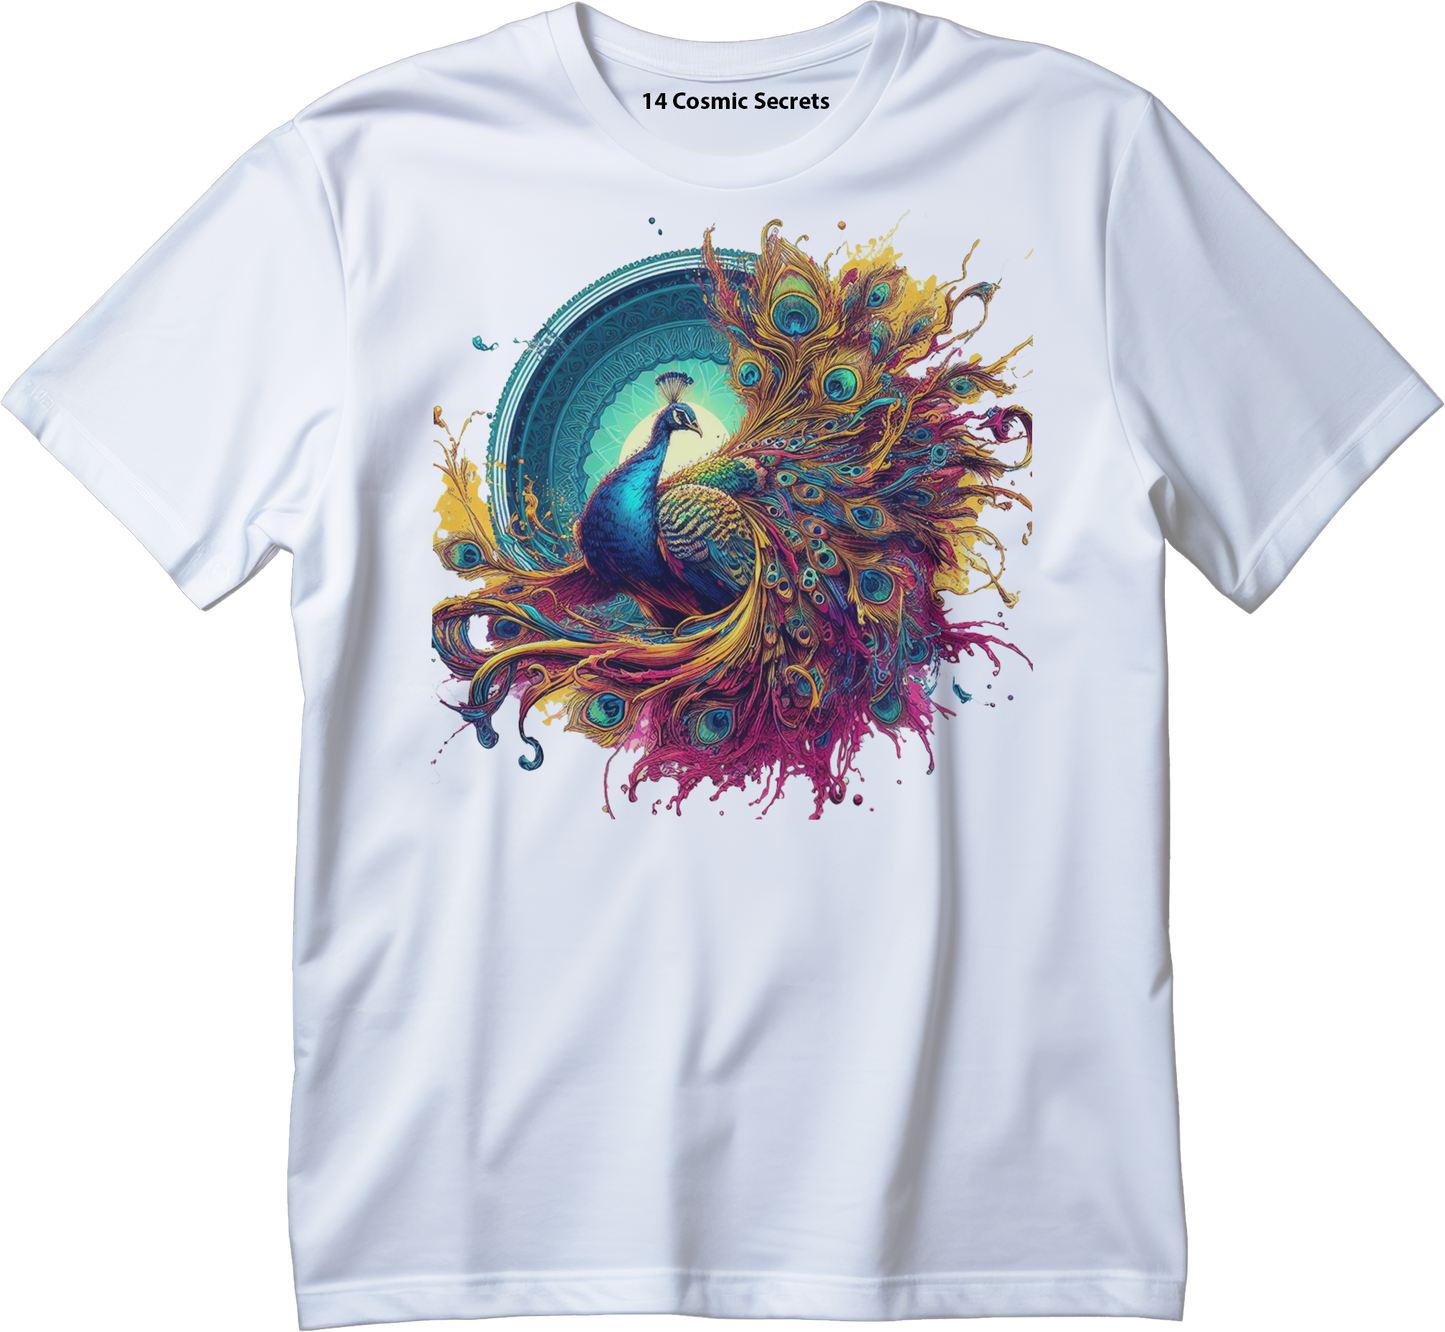 The Amazing Peacock Graphic Printed T-Shirt  Cotton T-Shirt Magnificence of India T-Shirt